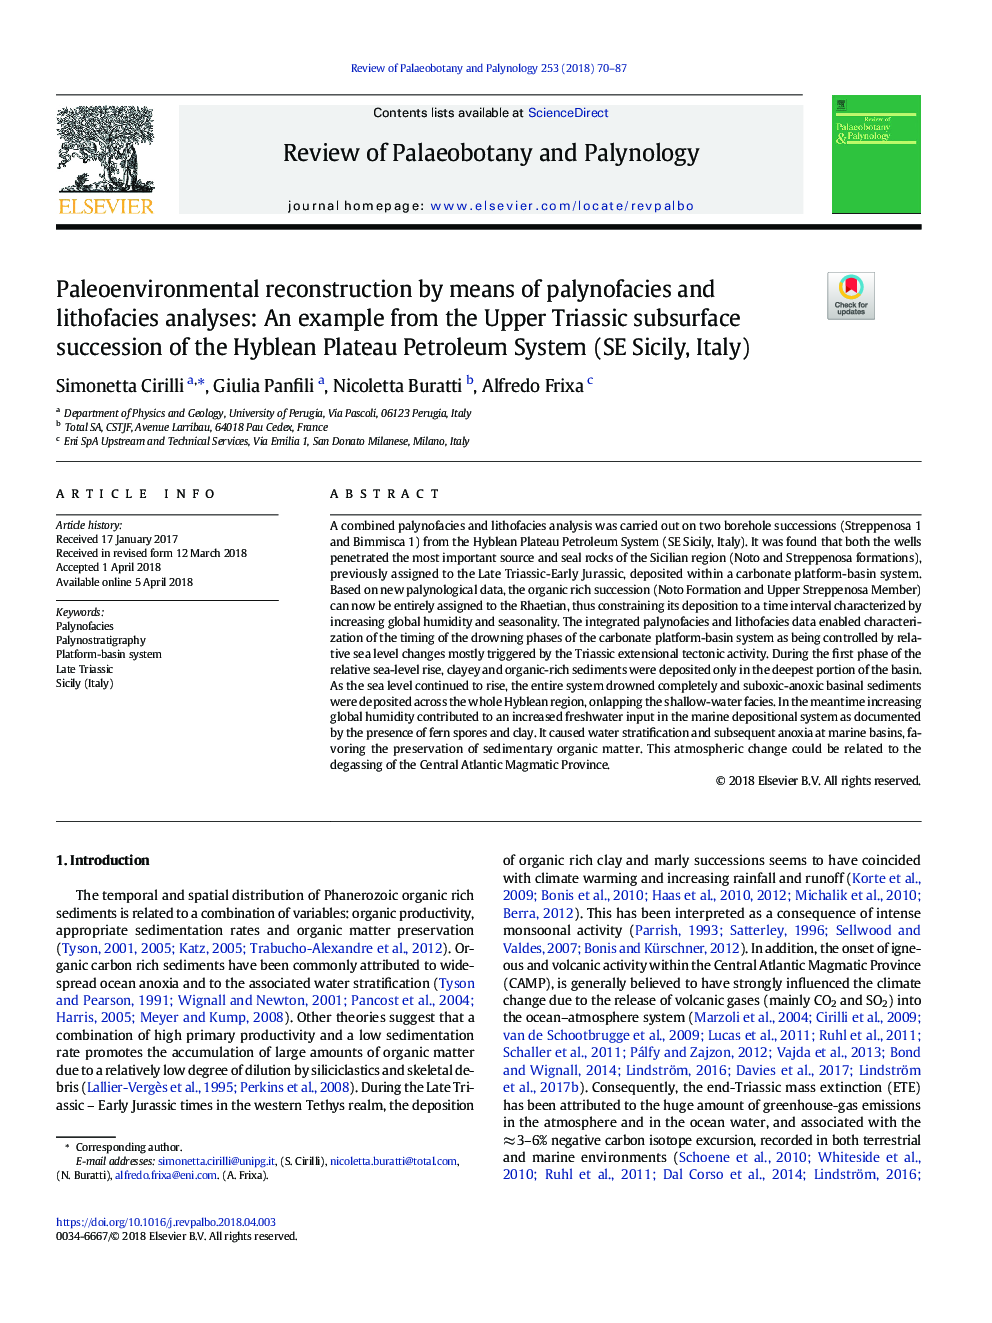 Paleoenvironmental reconstruction by means of palynofacies and lithofacies analyses: An example from the Upper Triassic subsurface succession of the Hyblean Plateau Petroleum System (SE Sicily, Italy)